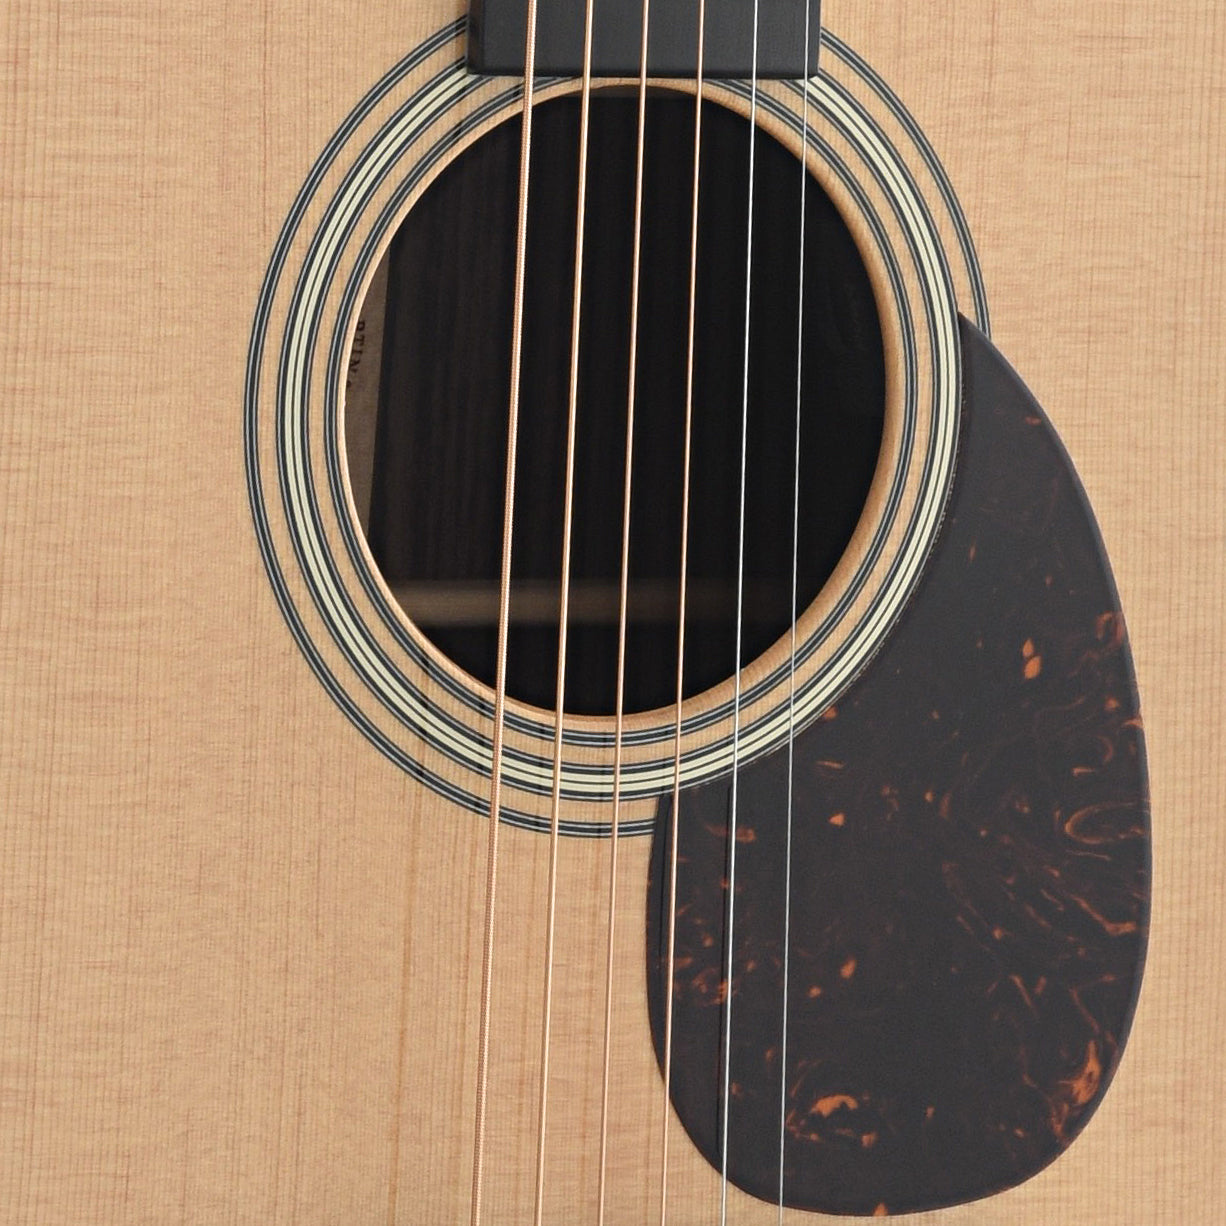 Soundhole and Pickguard of Martin OM-28E Modern Deluxe Guitar